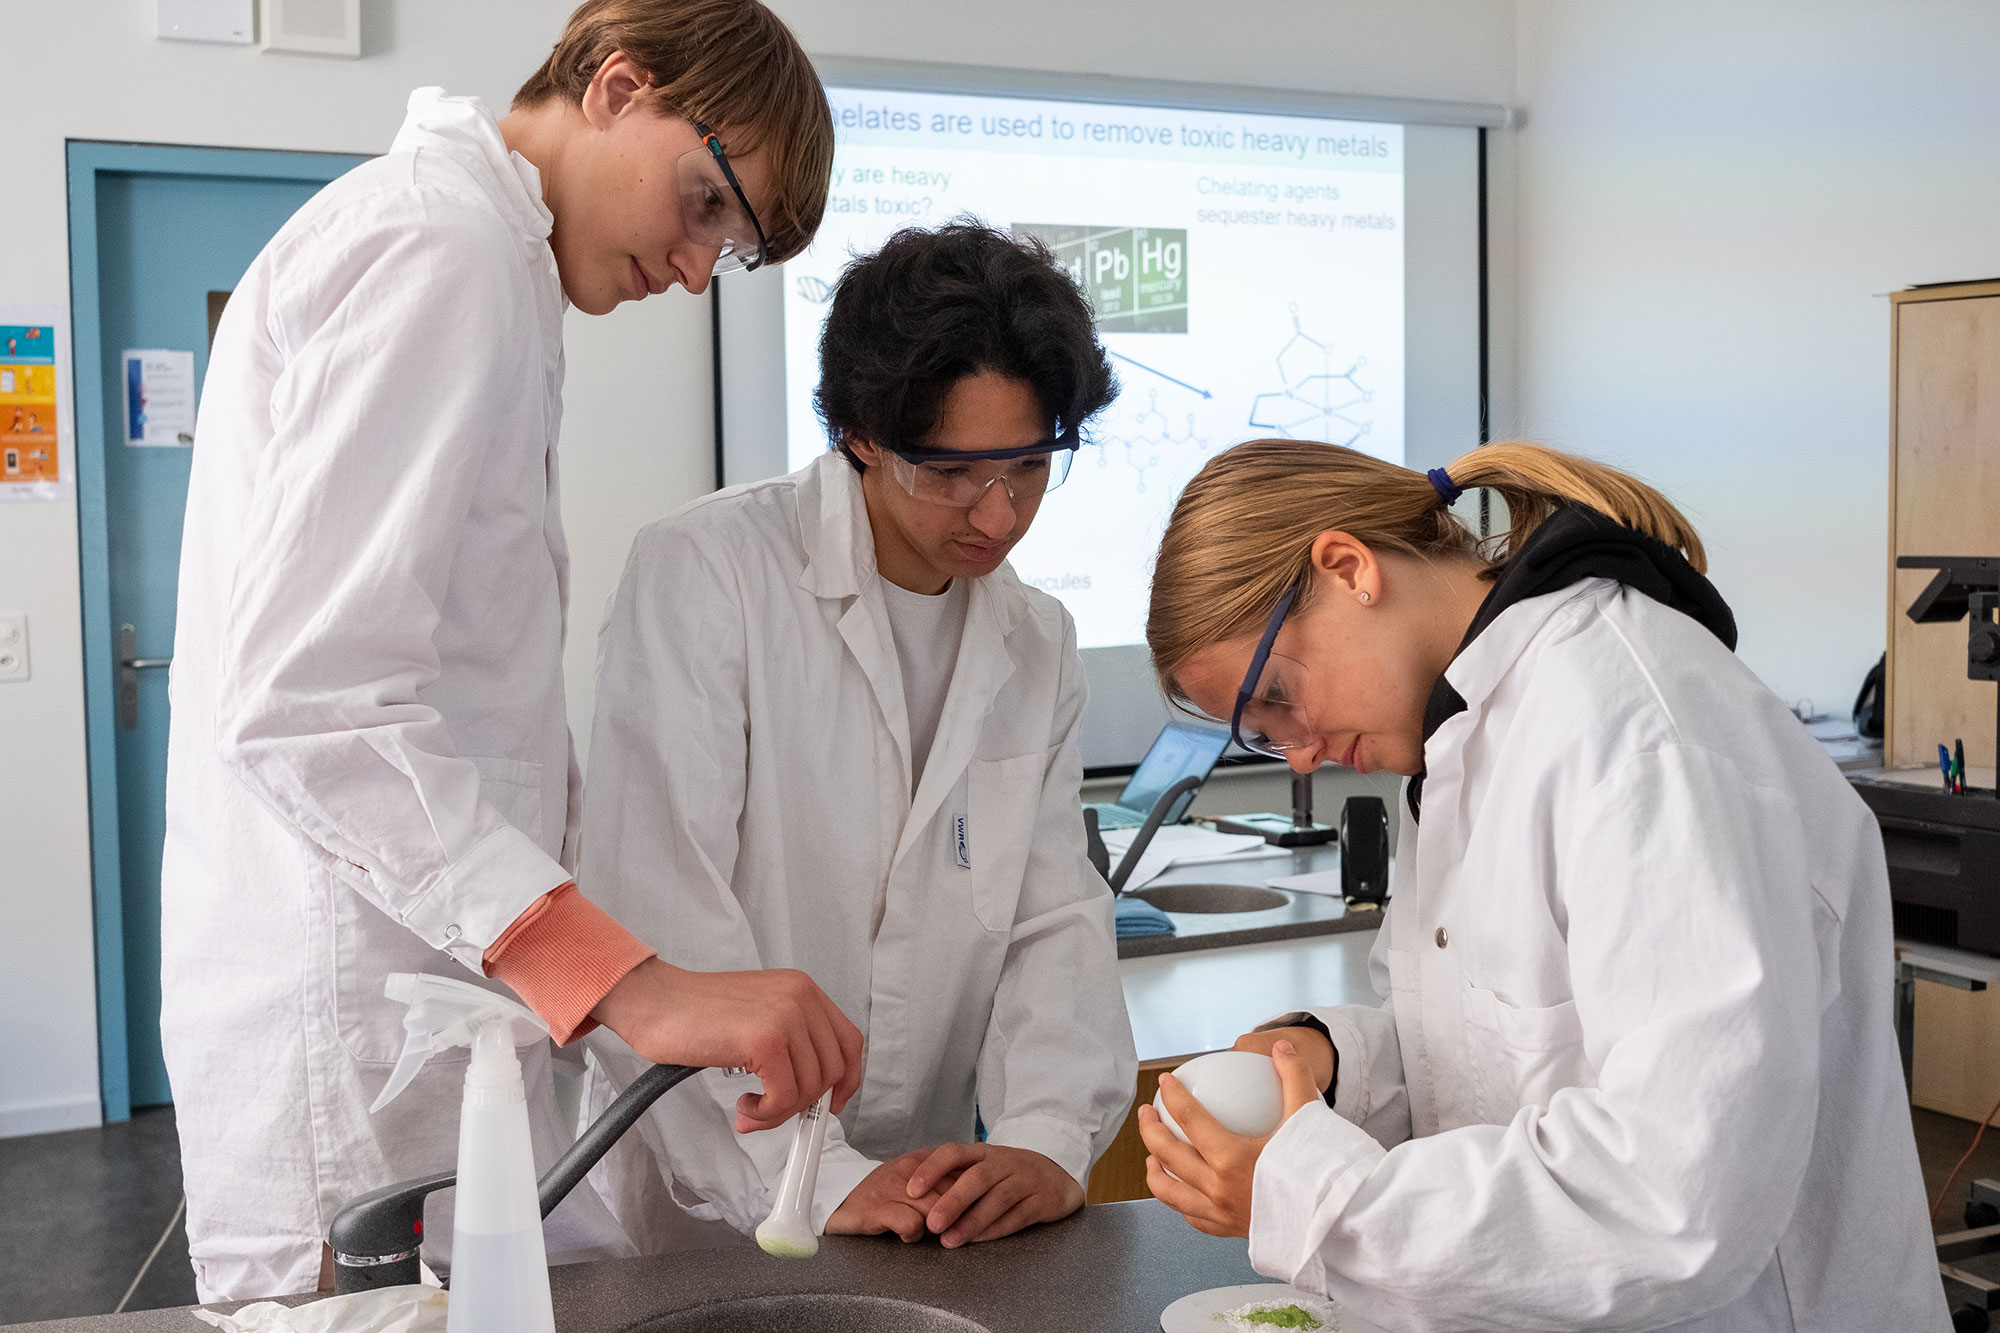 Two male students and a female student are experimenting in the laboratory and are wearing white coats.	